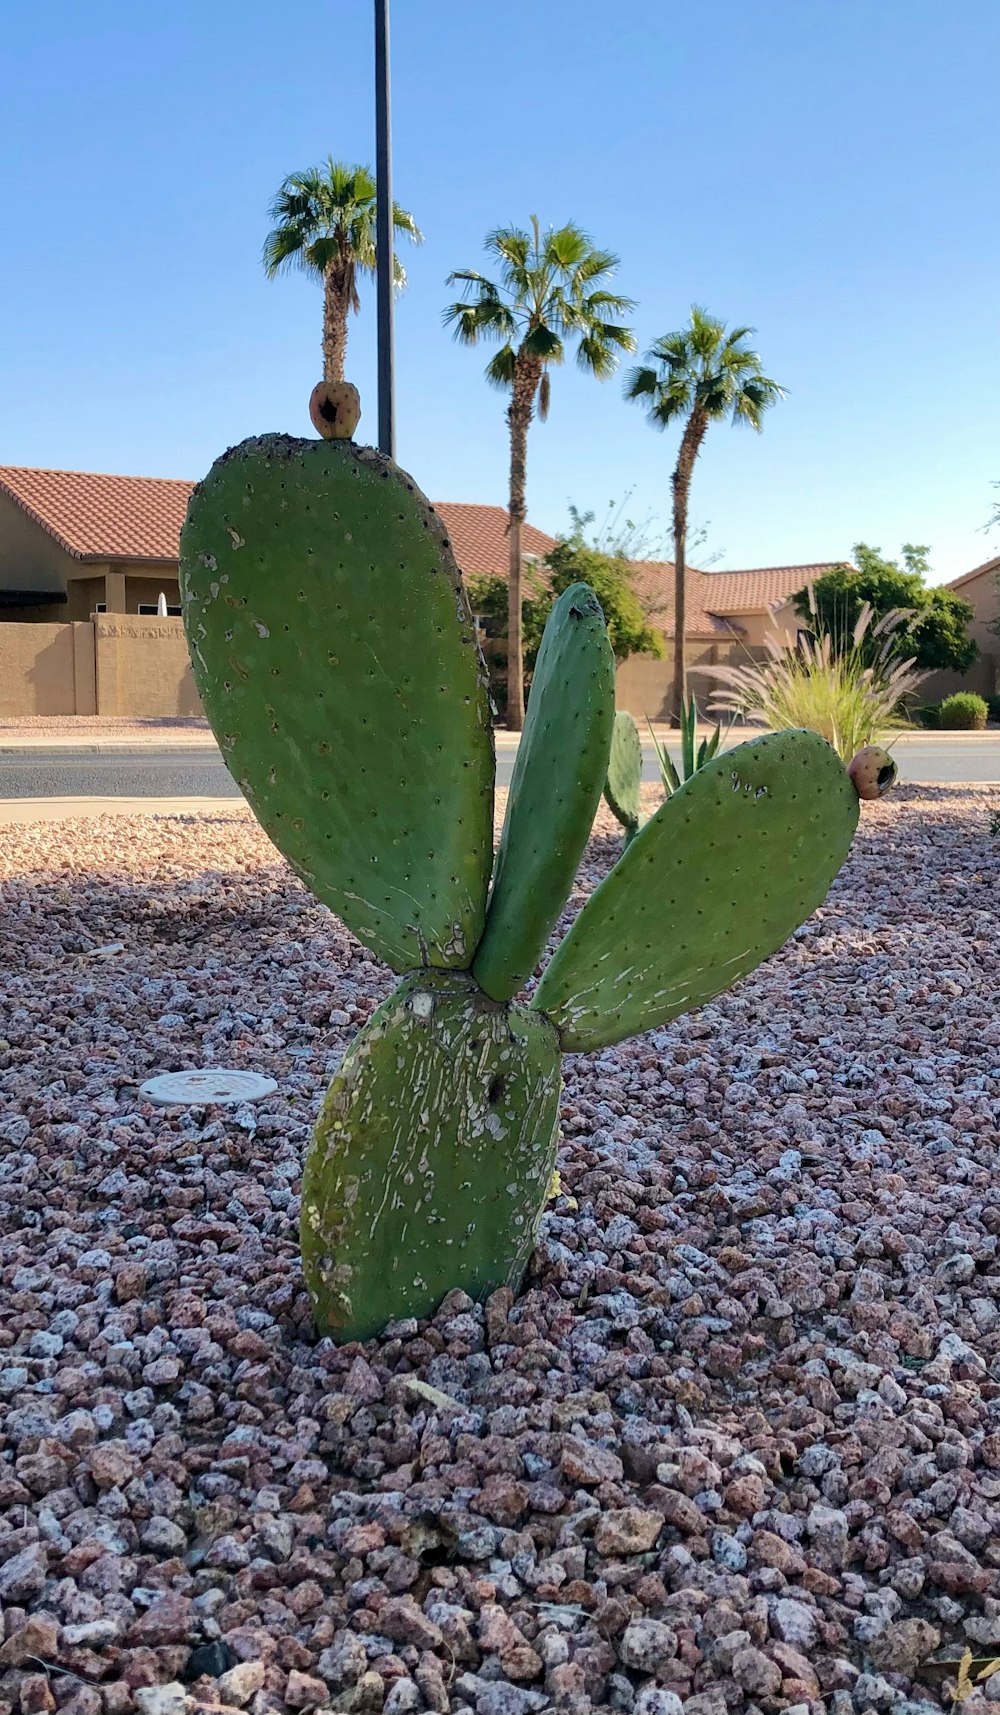 a cactus in the middle of a gravel area